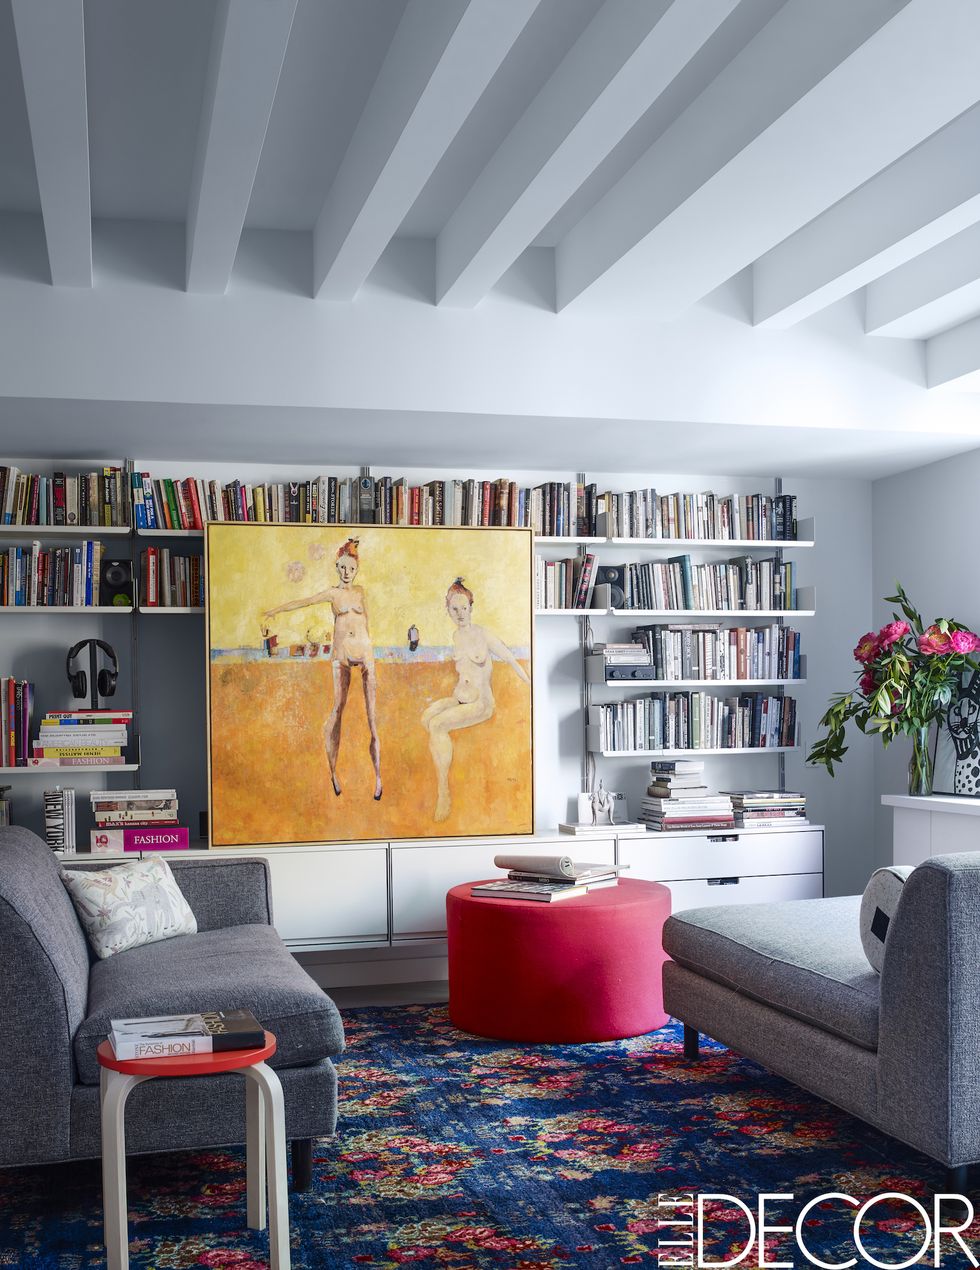 Take a Look Inside This West Village Guest House Designed By the